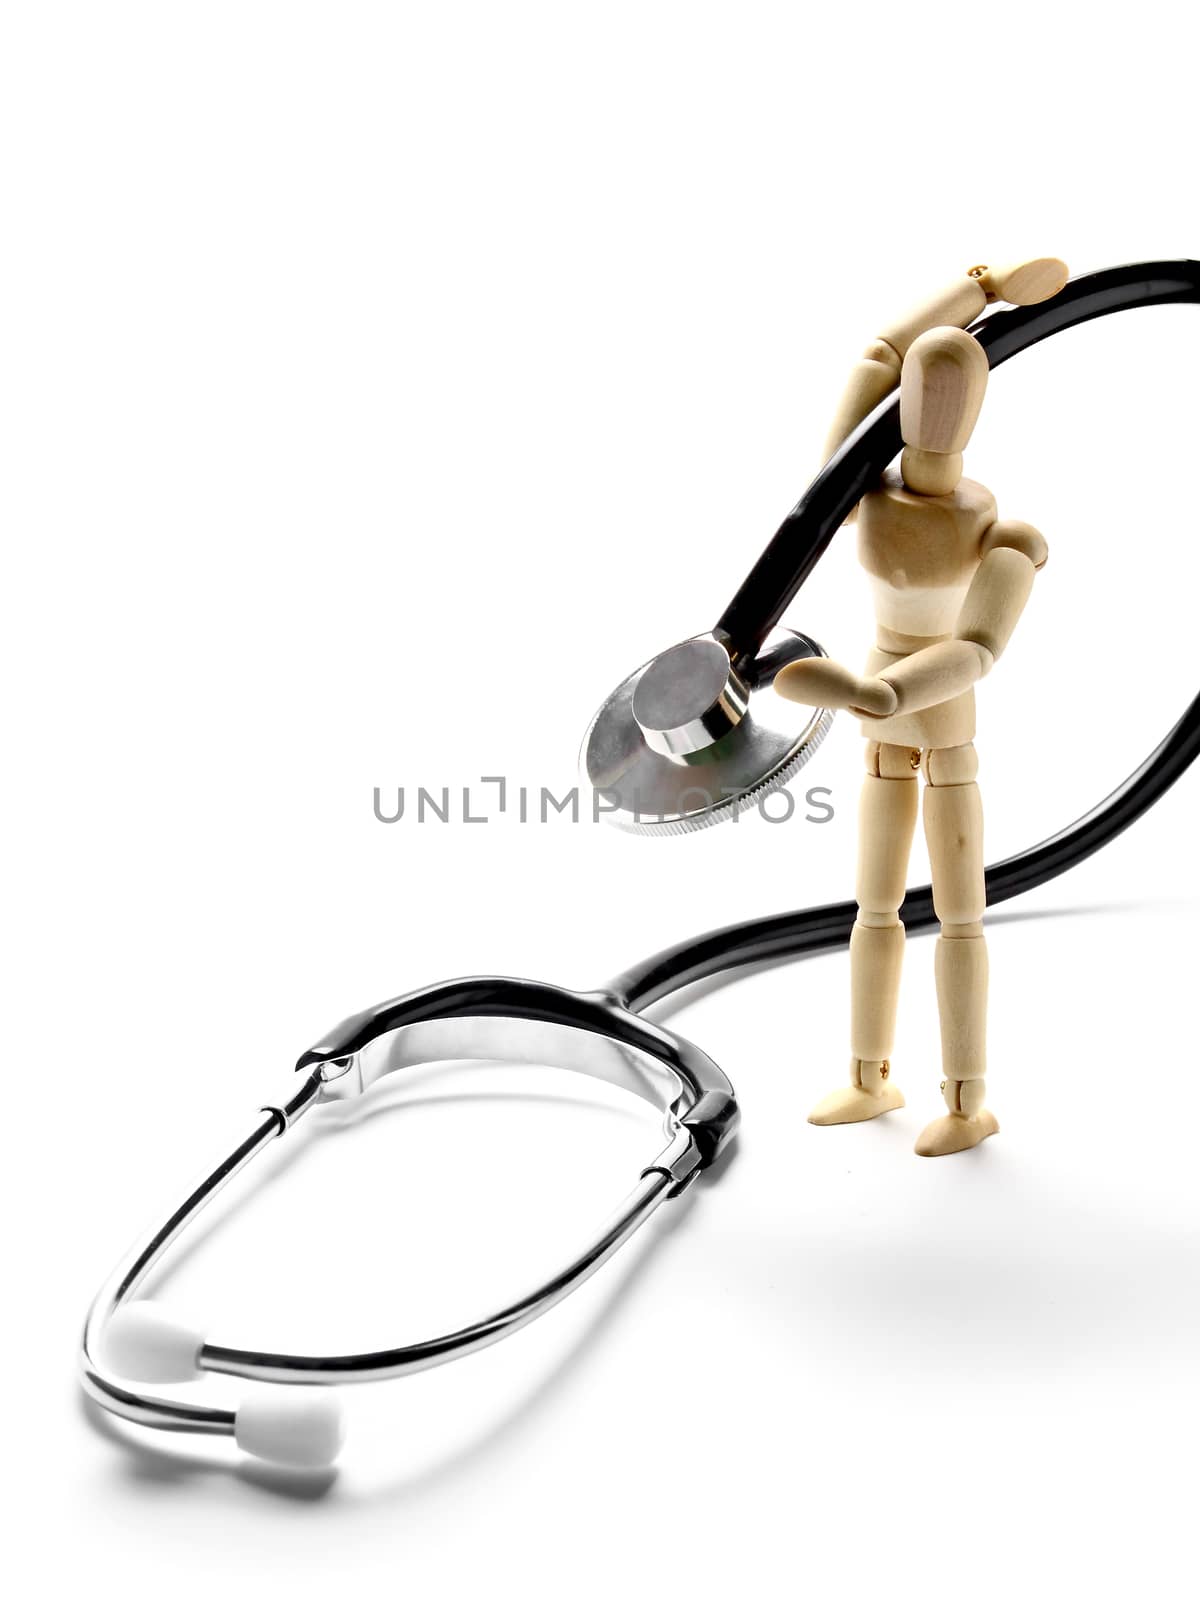 Wooden mannequin holding a stethoscope by dynamicfoto